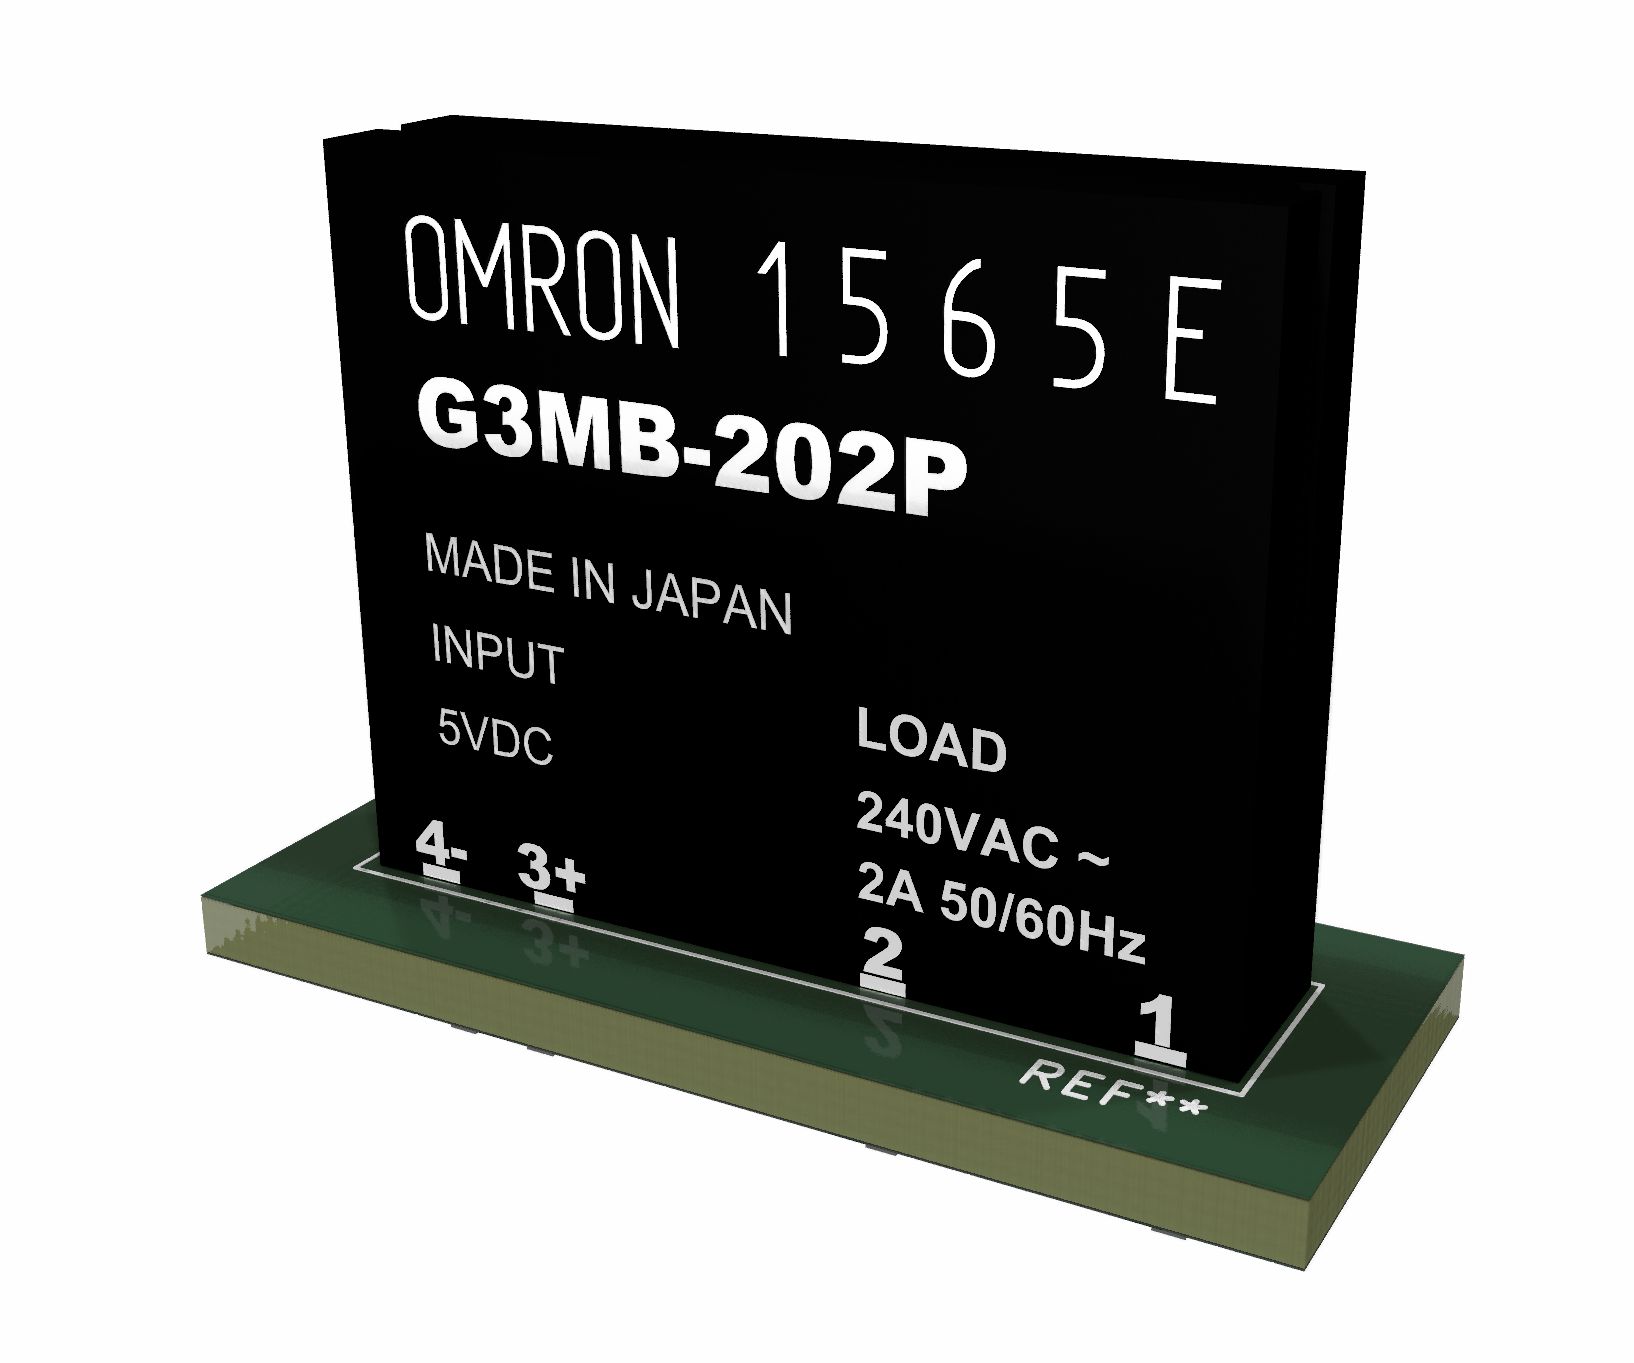 Relay_G3MB-202P 02